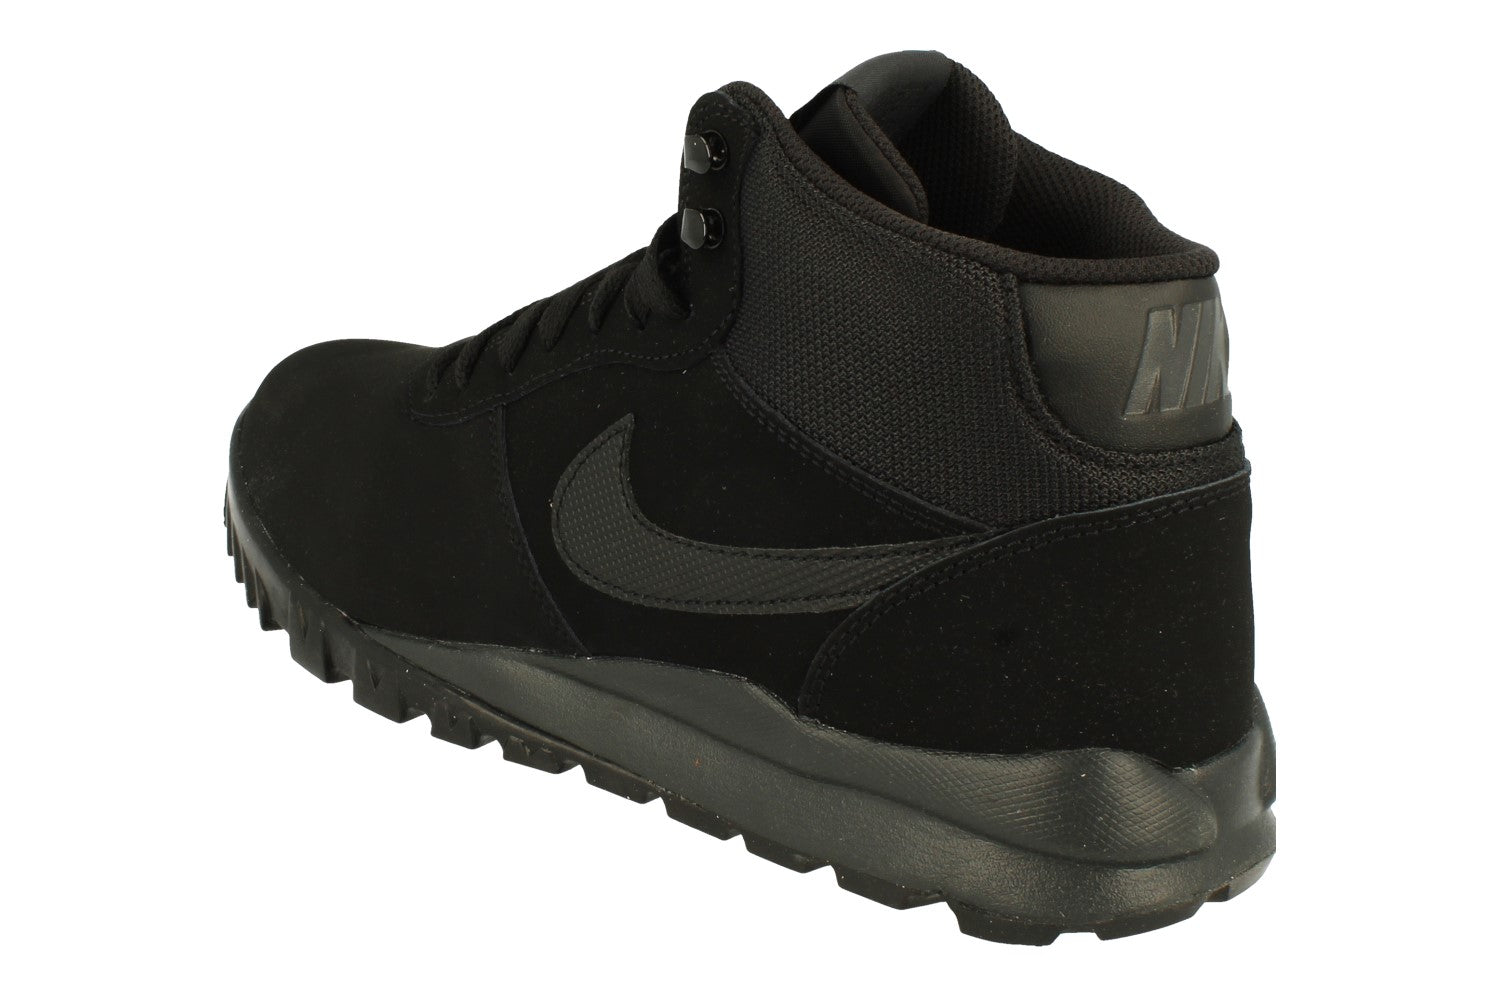 Buy Nike Hoodland Mens Trainers 654888 Boots Shoes (uk 10 us 11 eu black anthracite 090) 090 - Free UK Delivery - Super Fast EURO & USA Delivery! – KicksWorldwide